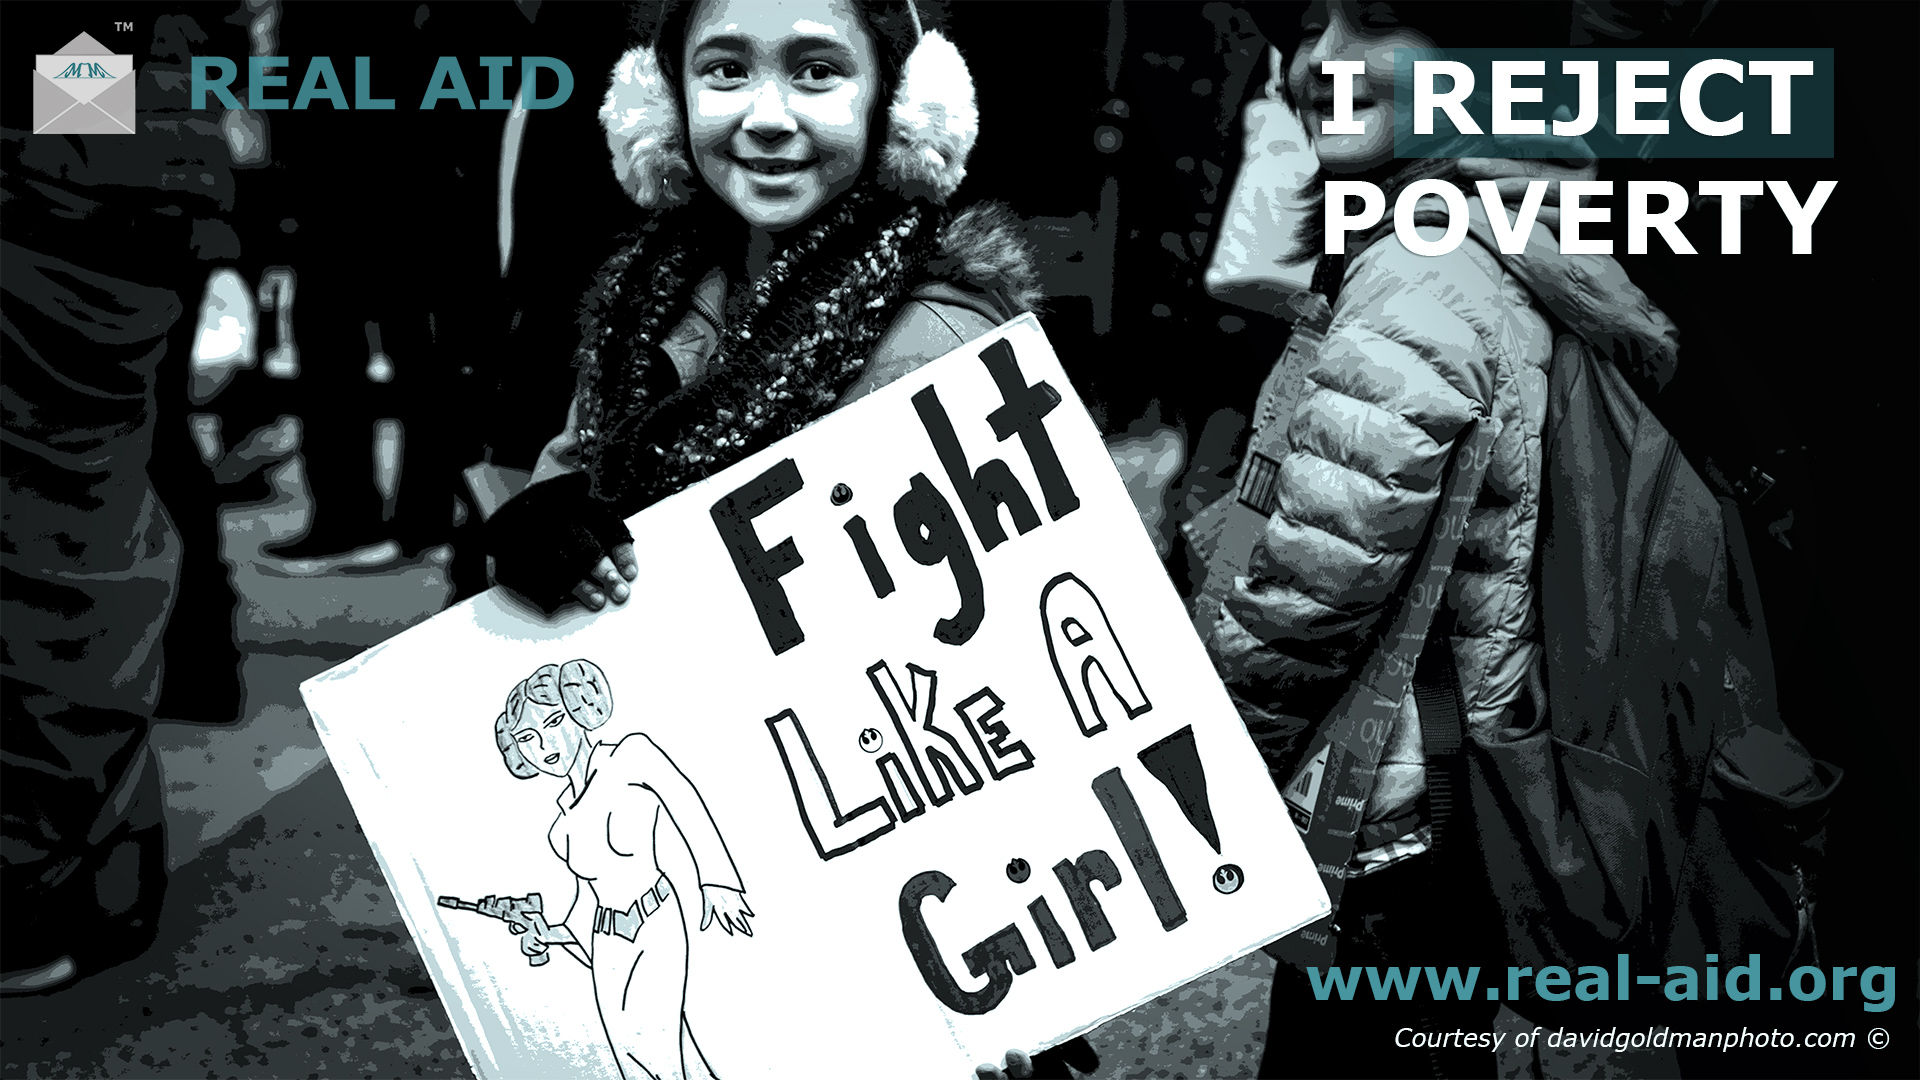 Real Aid poster, "I reject poverty" text, image of girl with "fight like a girl" sign at protest